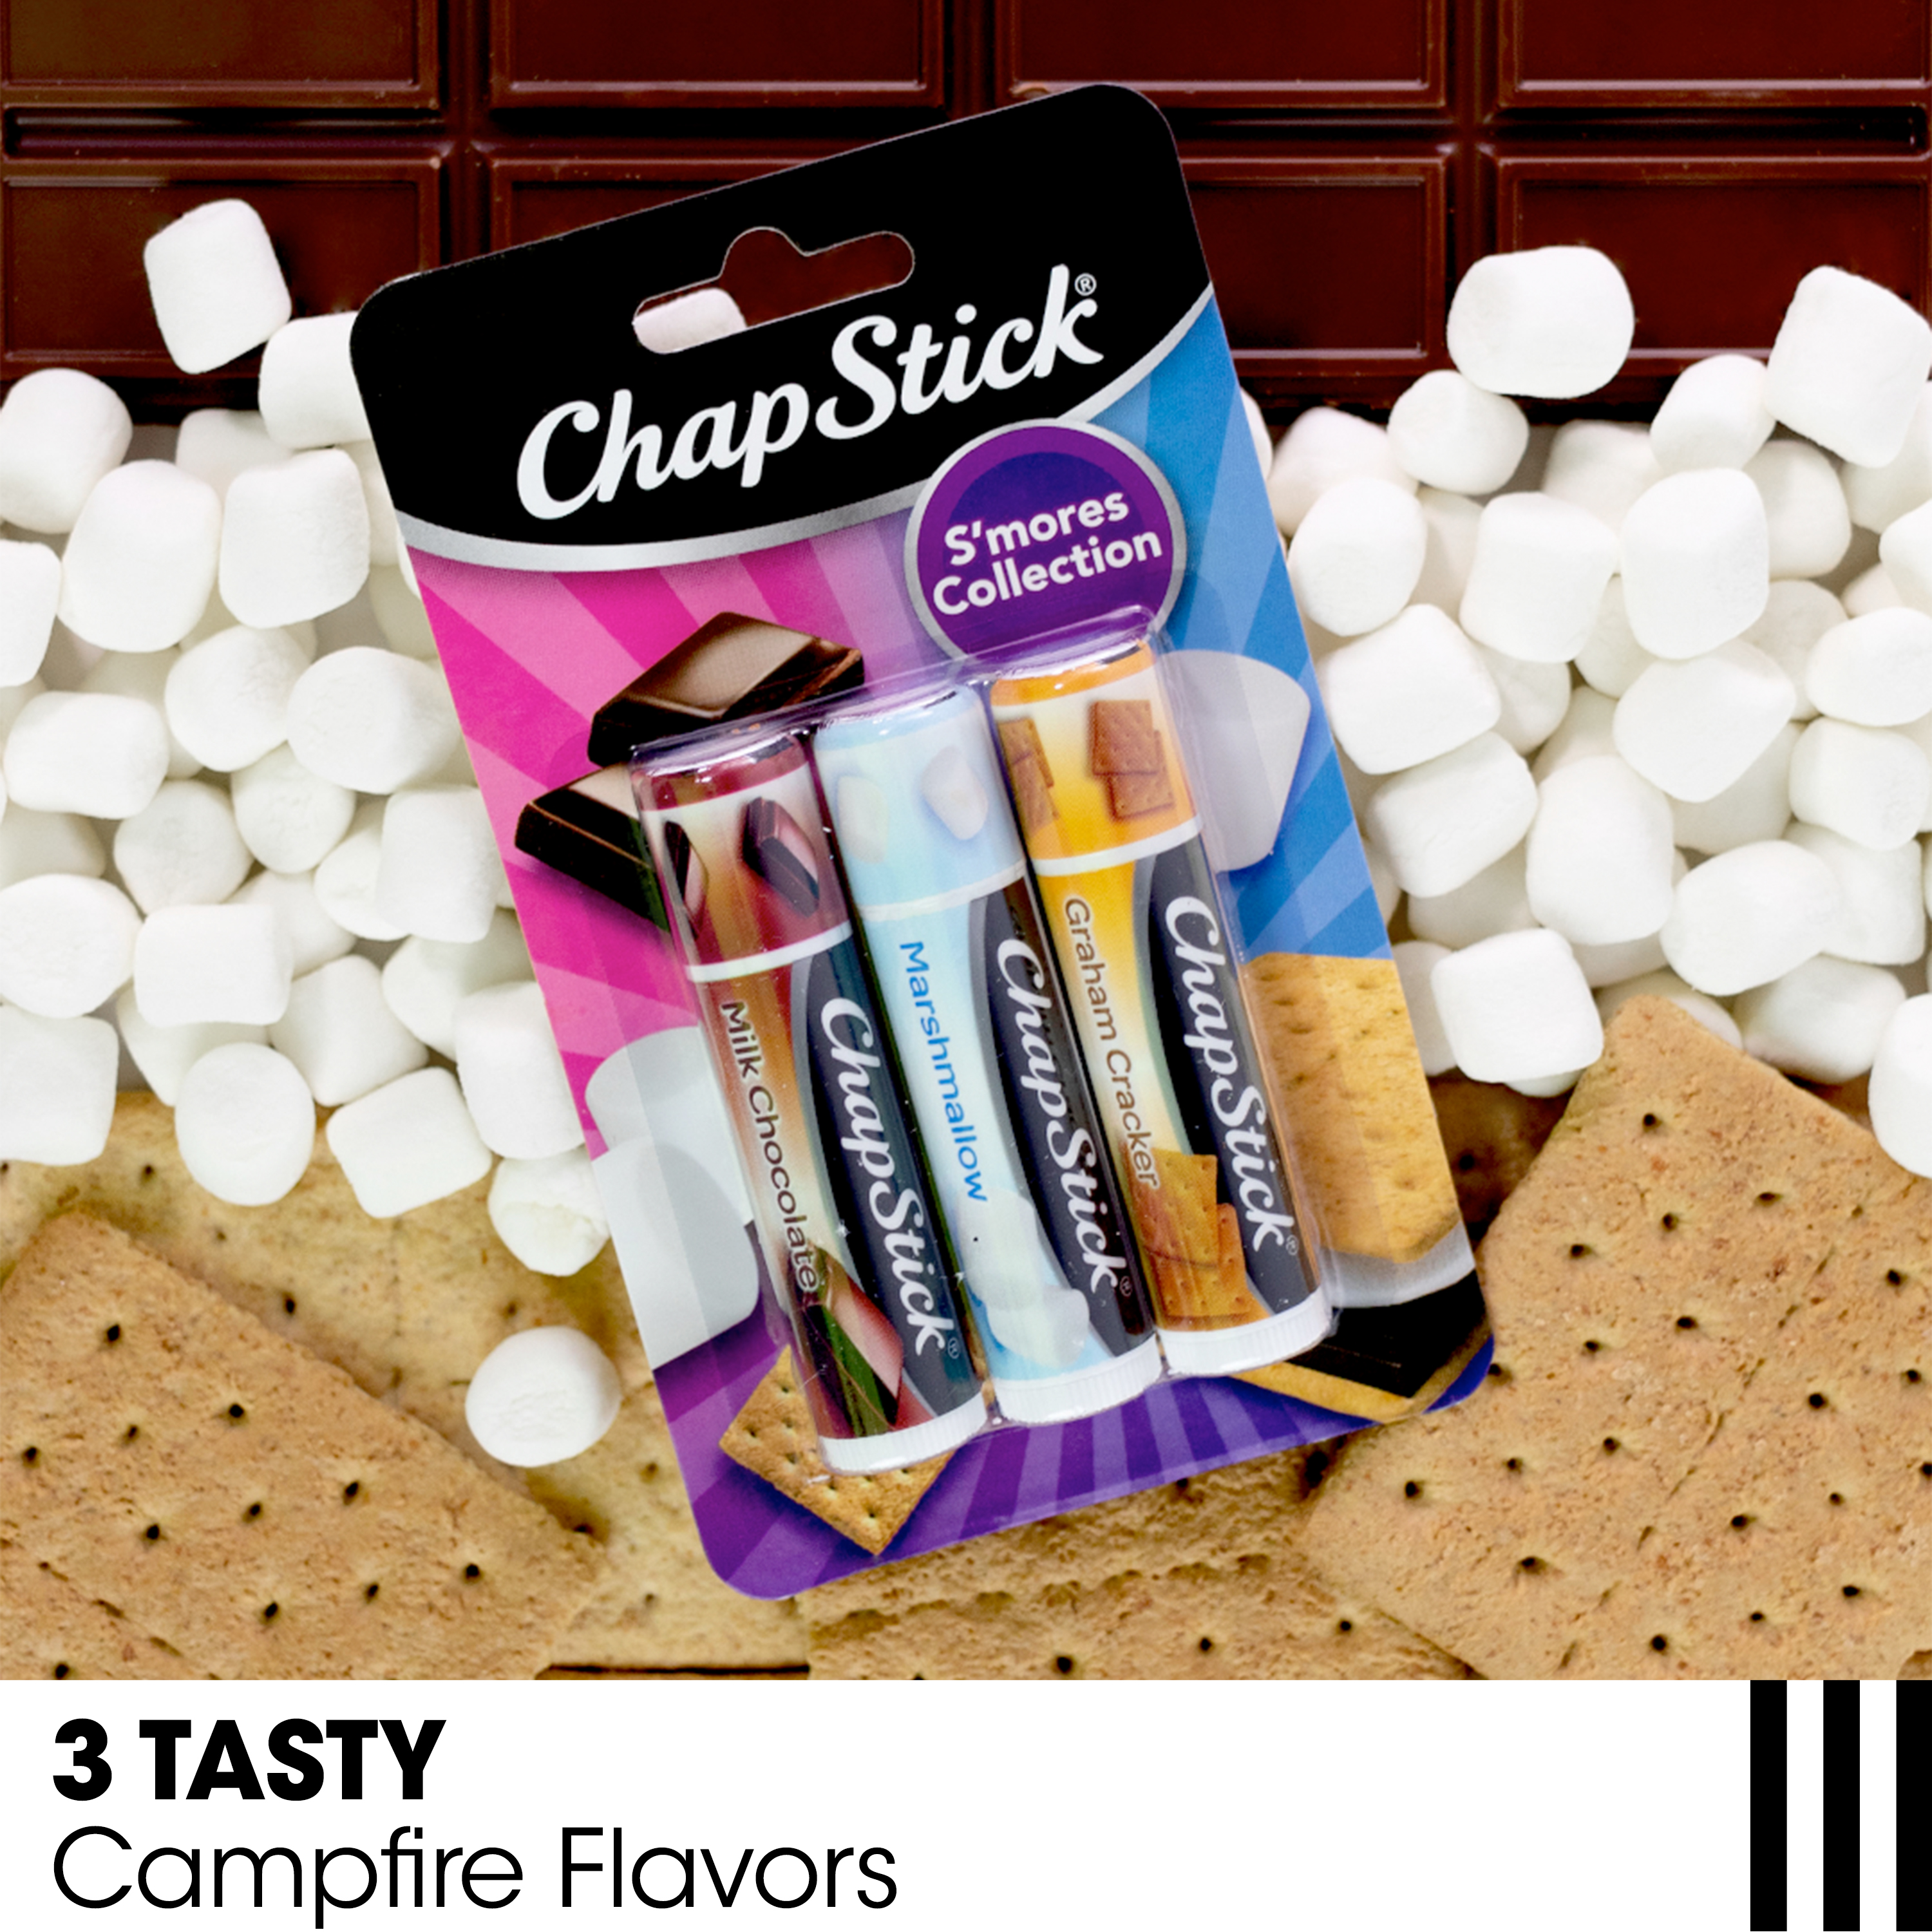 ChapStick S'mores Collection Flavored Lip Balm, Multi-Flavored, 0.15 Oz, 3 Pack - image 2 of 6